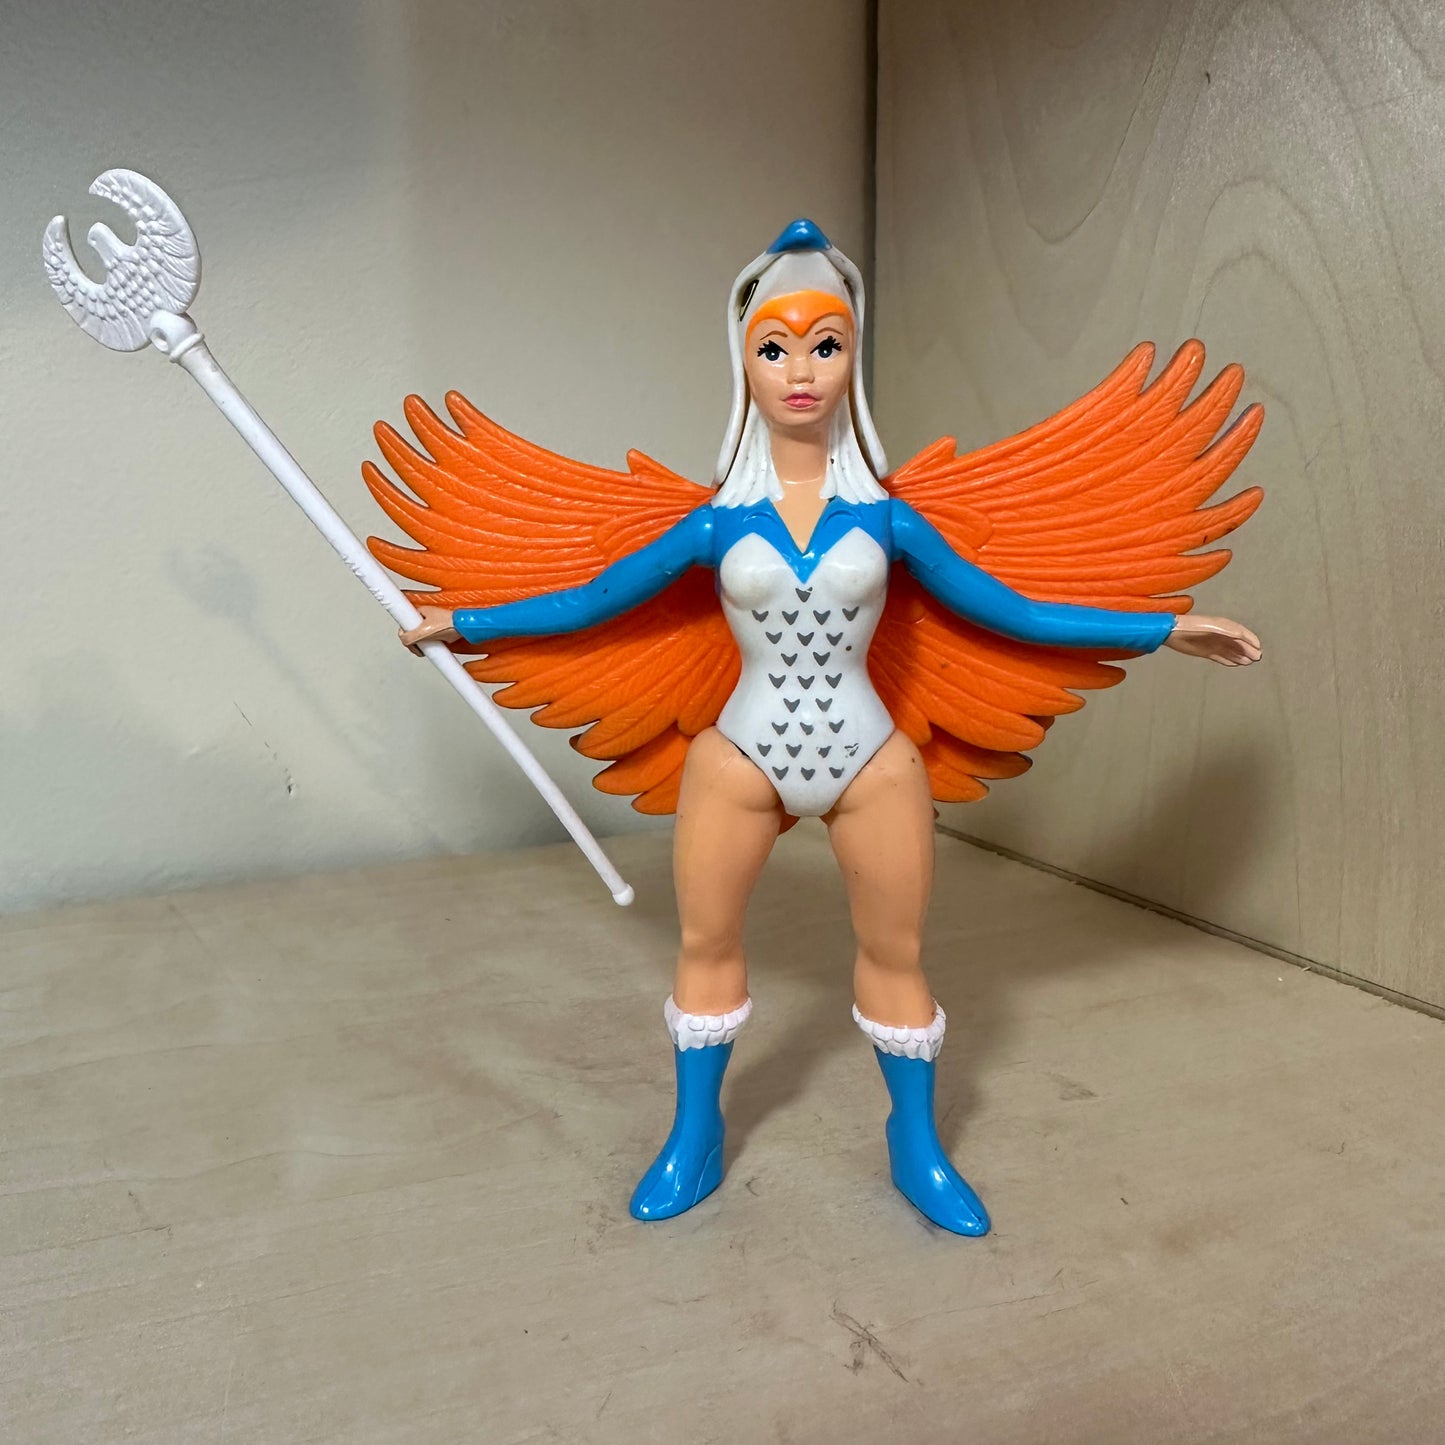 1986 MOTU Complete Sorceress Vintage Master’s of the Universe Action Figure He-Man